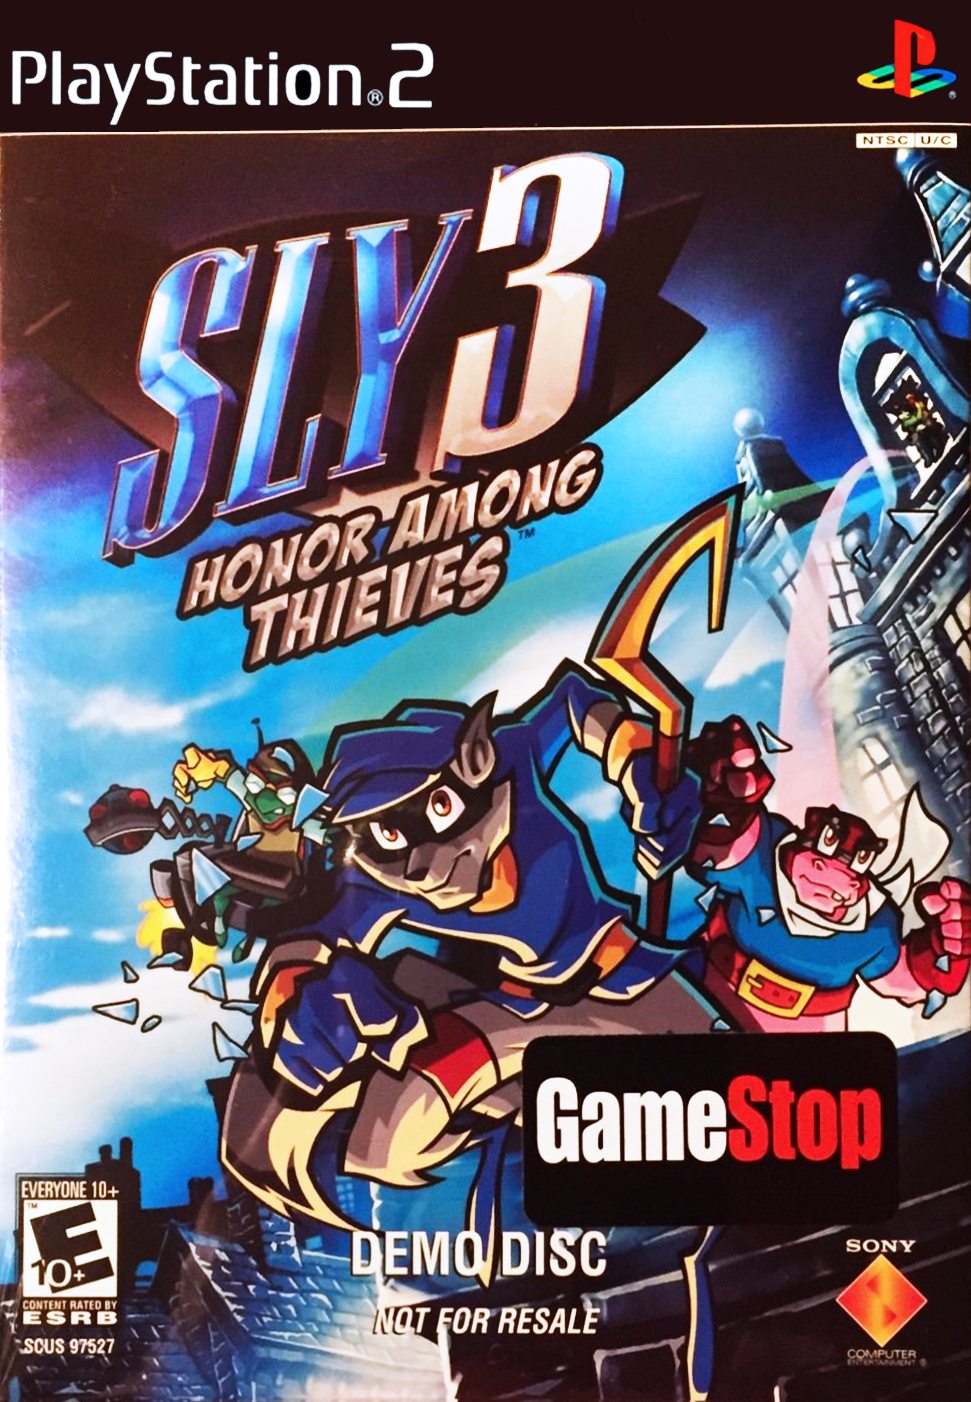 Sly 3: Honor Among Thieves — Peter McConnell